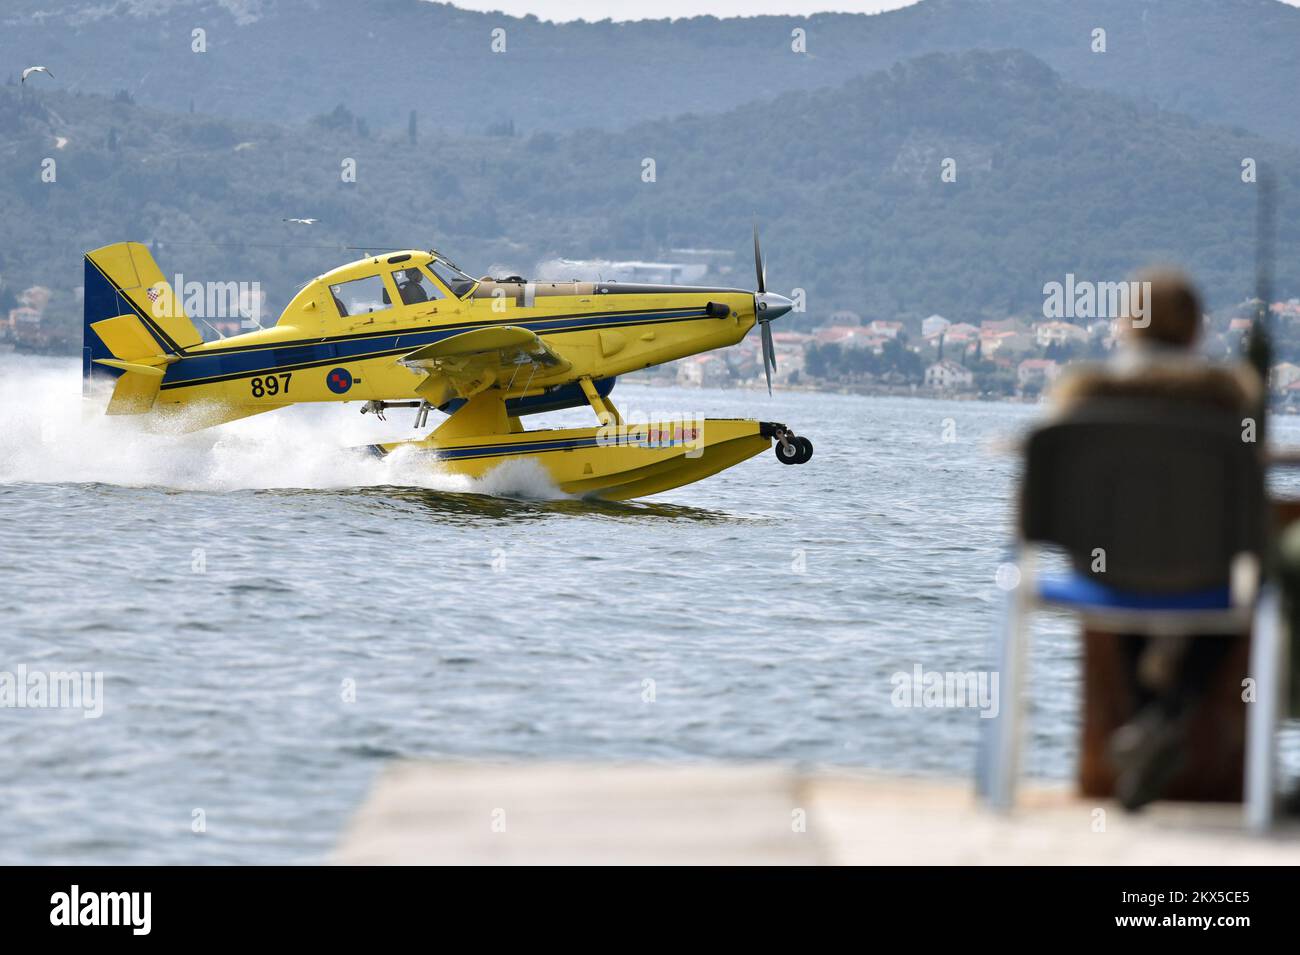 22.03.2018., Croatia, Zadar - Above the Zadar coast flying progmram 'Colonel Mirko Vukusic' was held , which was attended by aircrafts and helicopters from the 93rd airline base: Zlin-242L, Pilatus, Canadair cl-415, Airtractor, Bell, Kiowa Warrior, Wings of Storm Photo: Hrvoje Jelavic/PIXSELL Stock Photo